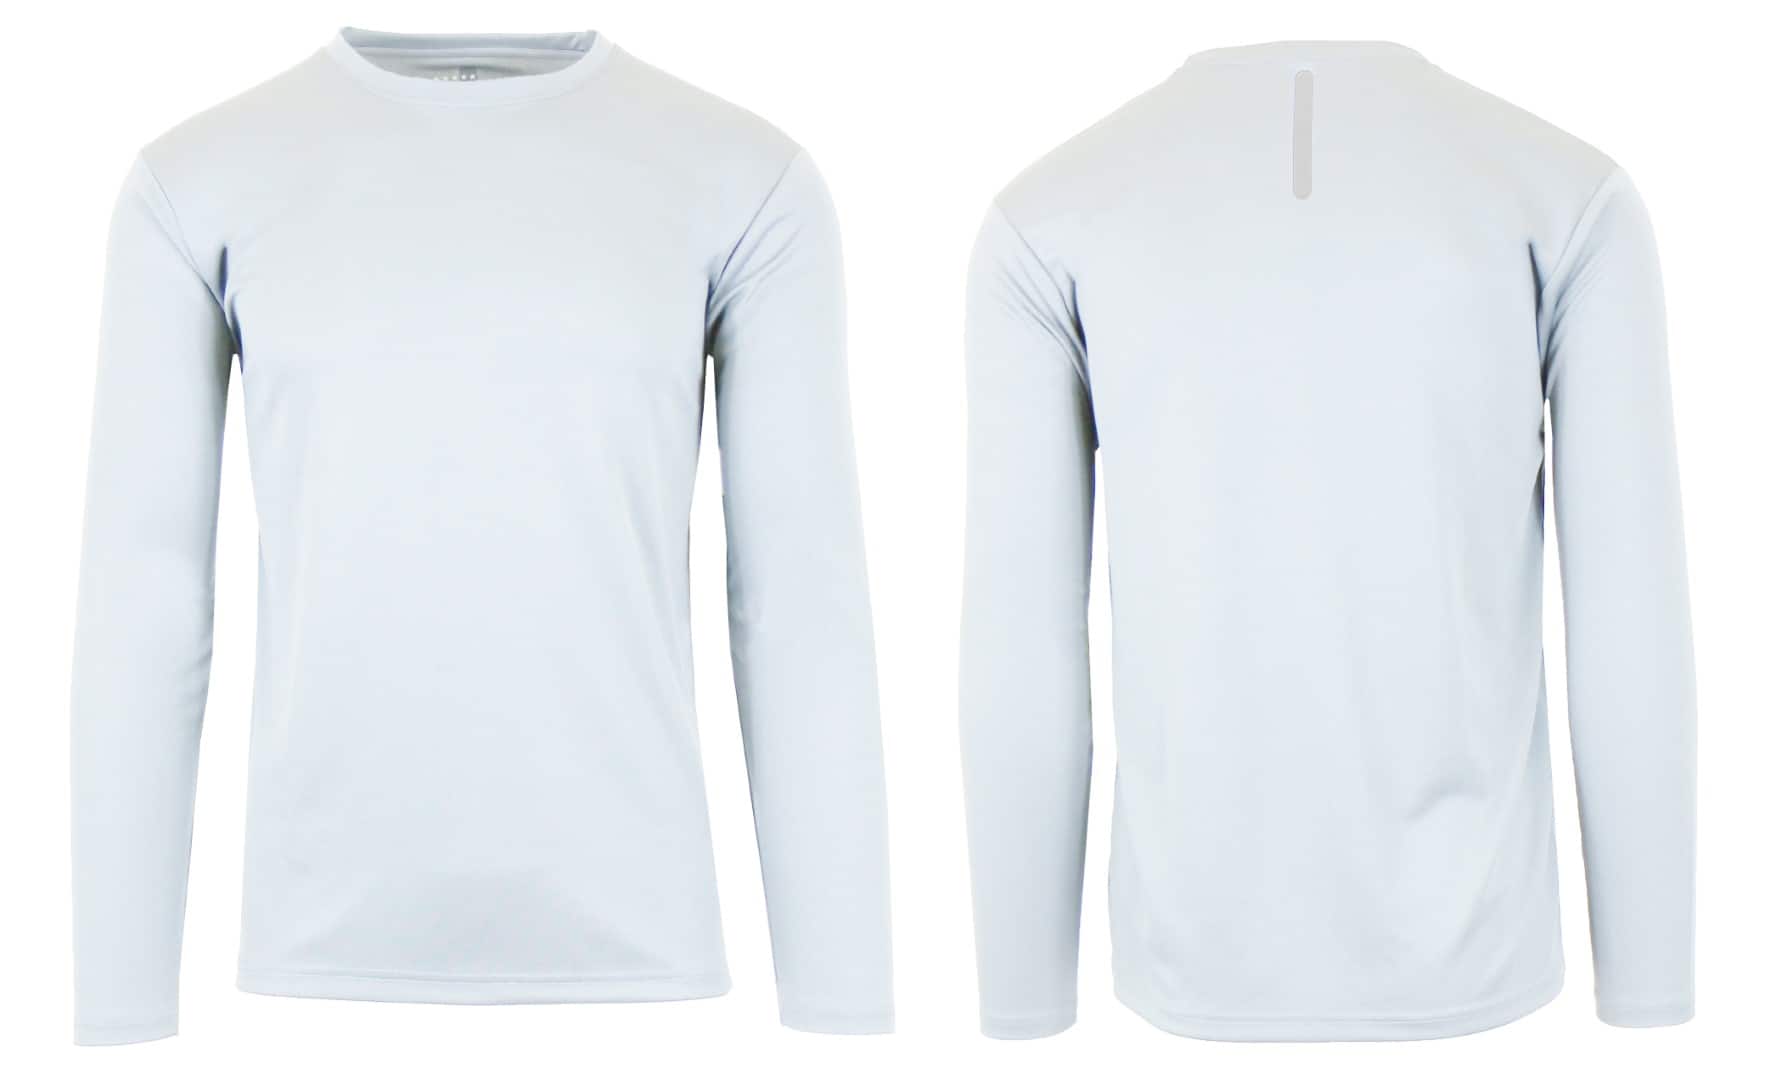 Galaxy By Harvic Long Sleeve Moisture-Wicking Performance Crew Neck Men's Tee